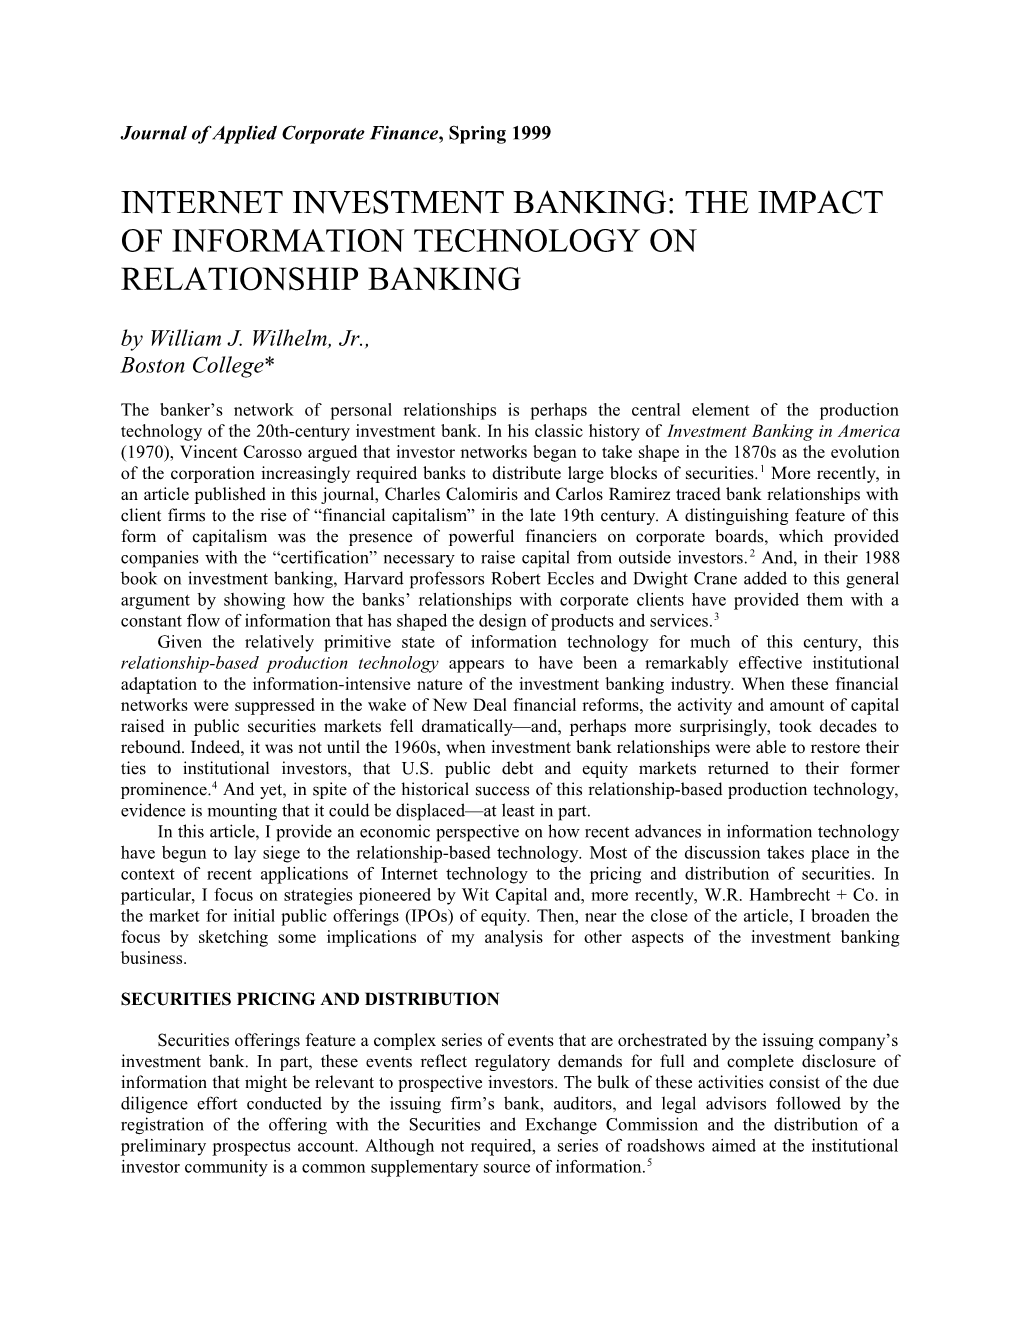 Internet Investment Banking: the Impact of Information Technology on Relationship Banking